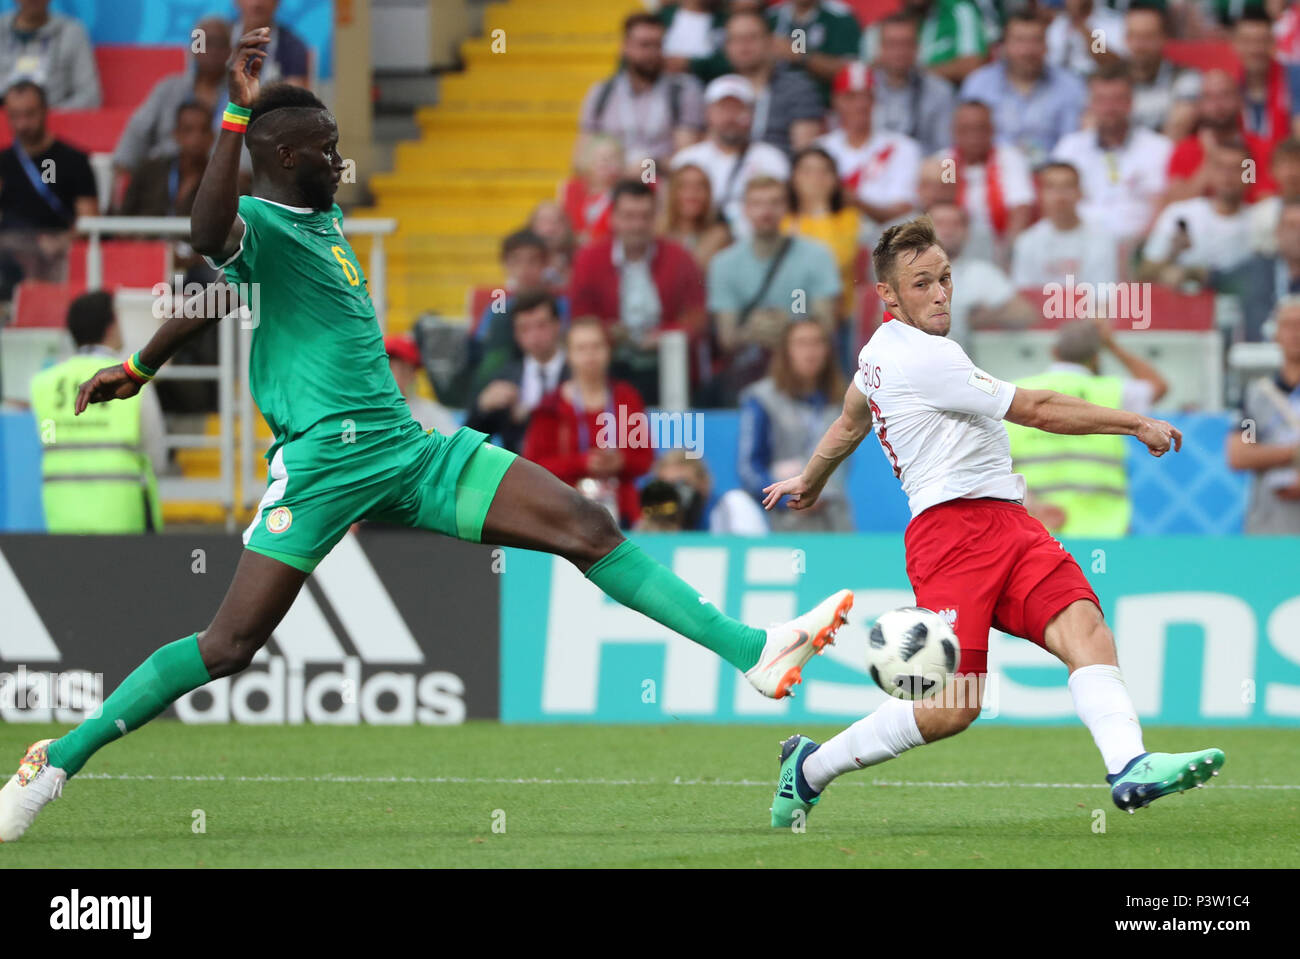 Moscow, Russia. 19th June, 2018. Maciej Rybus (R) of Poland vies with Salif Sane of Senegal during a Group H match between Poland and Senegal at the 2018 FIFA World Cup in Moscow, Russia, June 19, 2018. Senegal won 2-1. Credit: Ye Pingfan/Xinhua/Alamy Live News Stock Photo